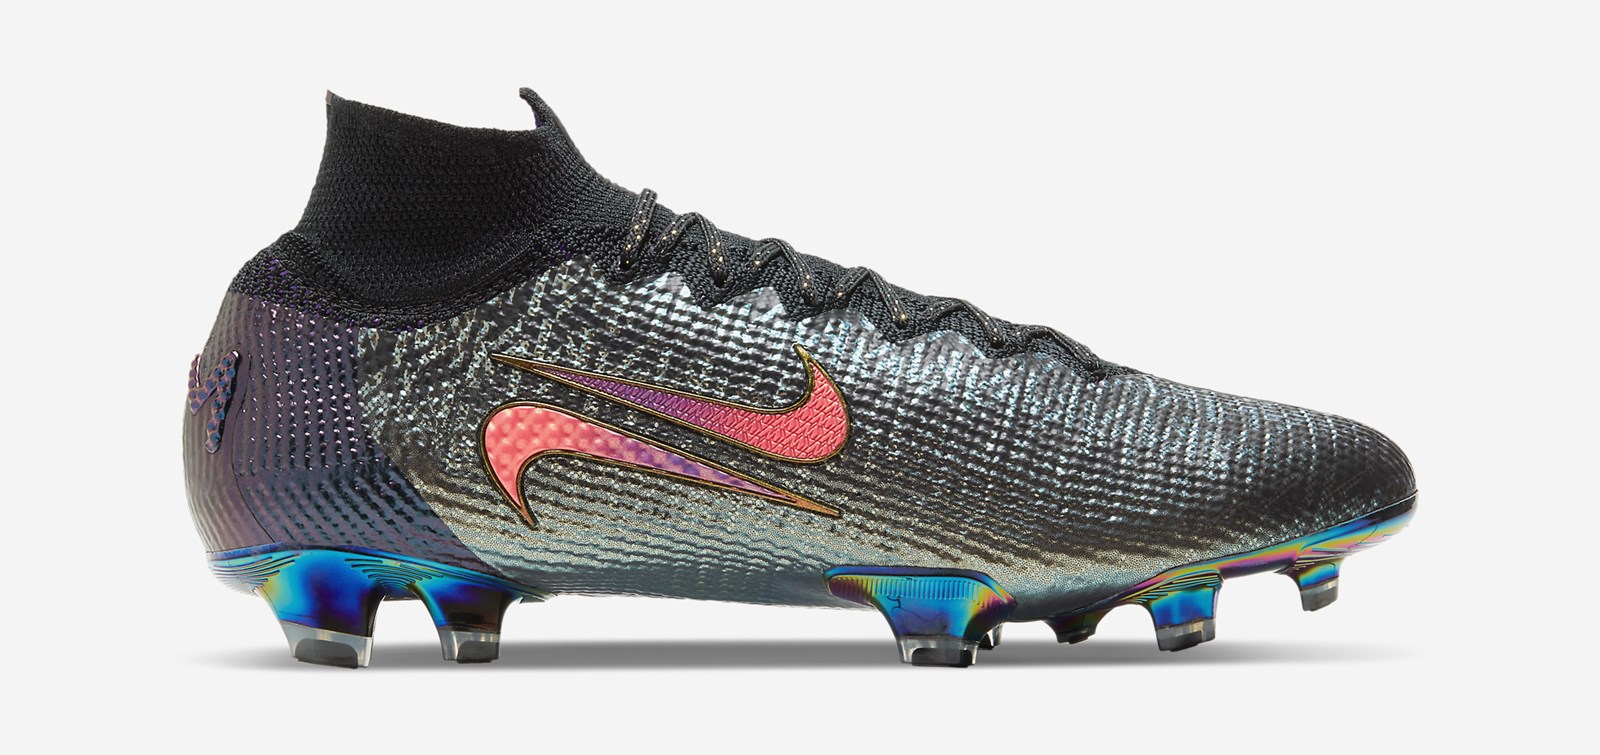 mbappe new boots 2019